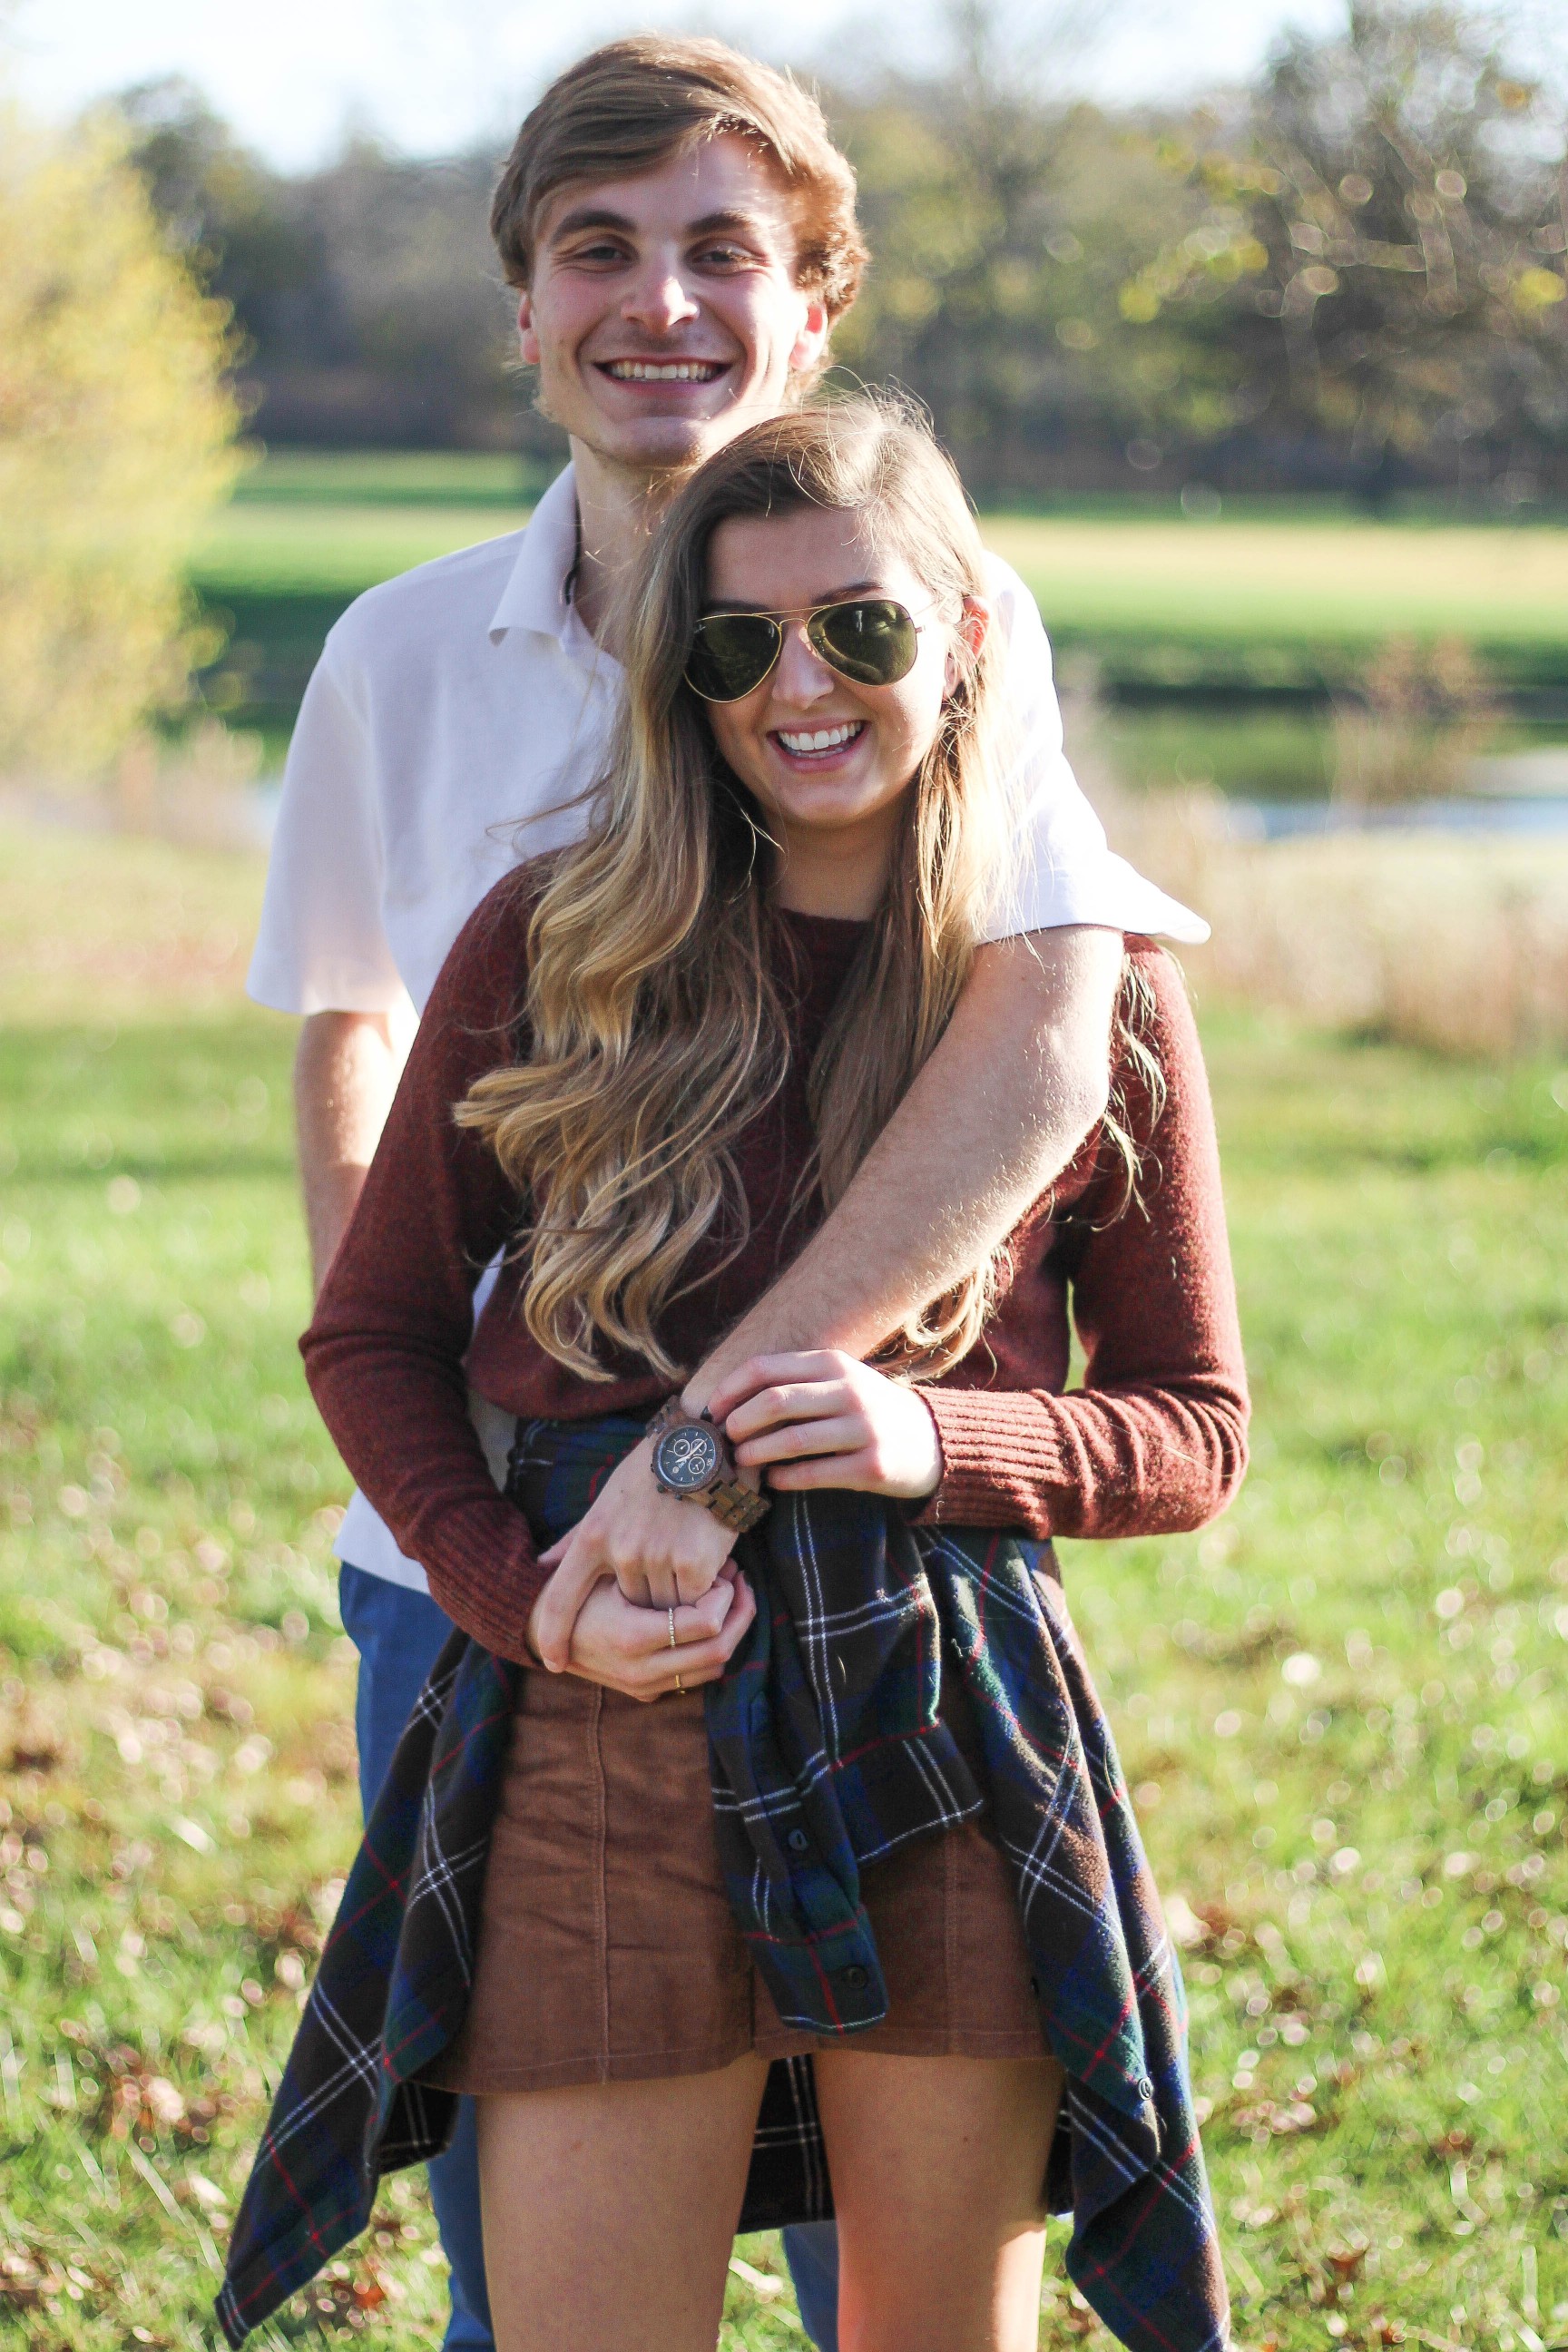 The perfect fall outfit! The corduroy skirt is showing up everywhere so I decided to pair it with a flannel to be a bit different. Of course I added a burgundy sweater because it's my favorite color for fall! As for my boyfriend, he's rocking a JORD wooden watch that I am in love with! Cute couple pictures are my favorite, check out our poses for engagement photo ideas and more! By Lauren Lindmark on Daily Dose of Charm dailydoseofcharm.com